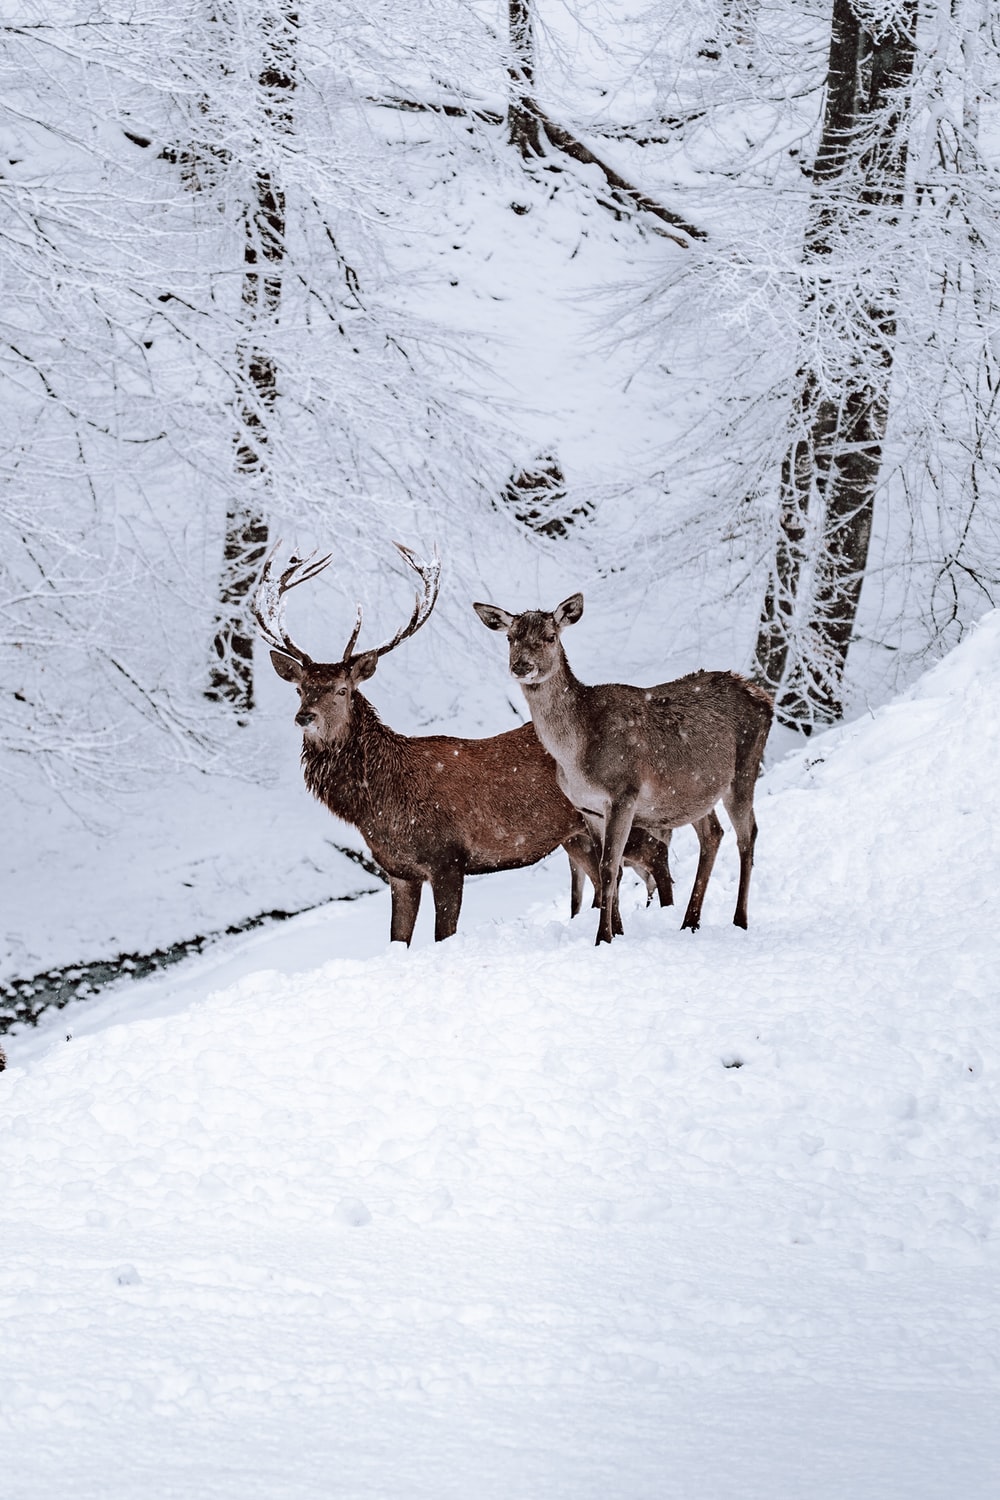 Deer Snow Picture. Download Free Image